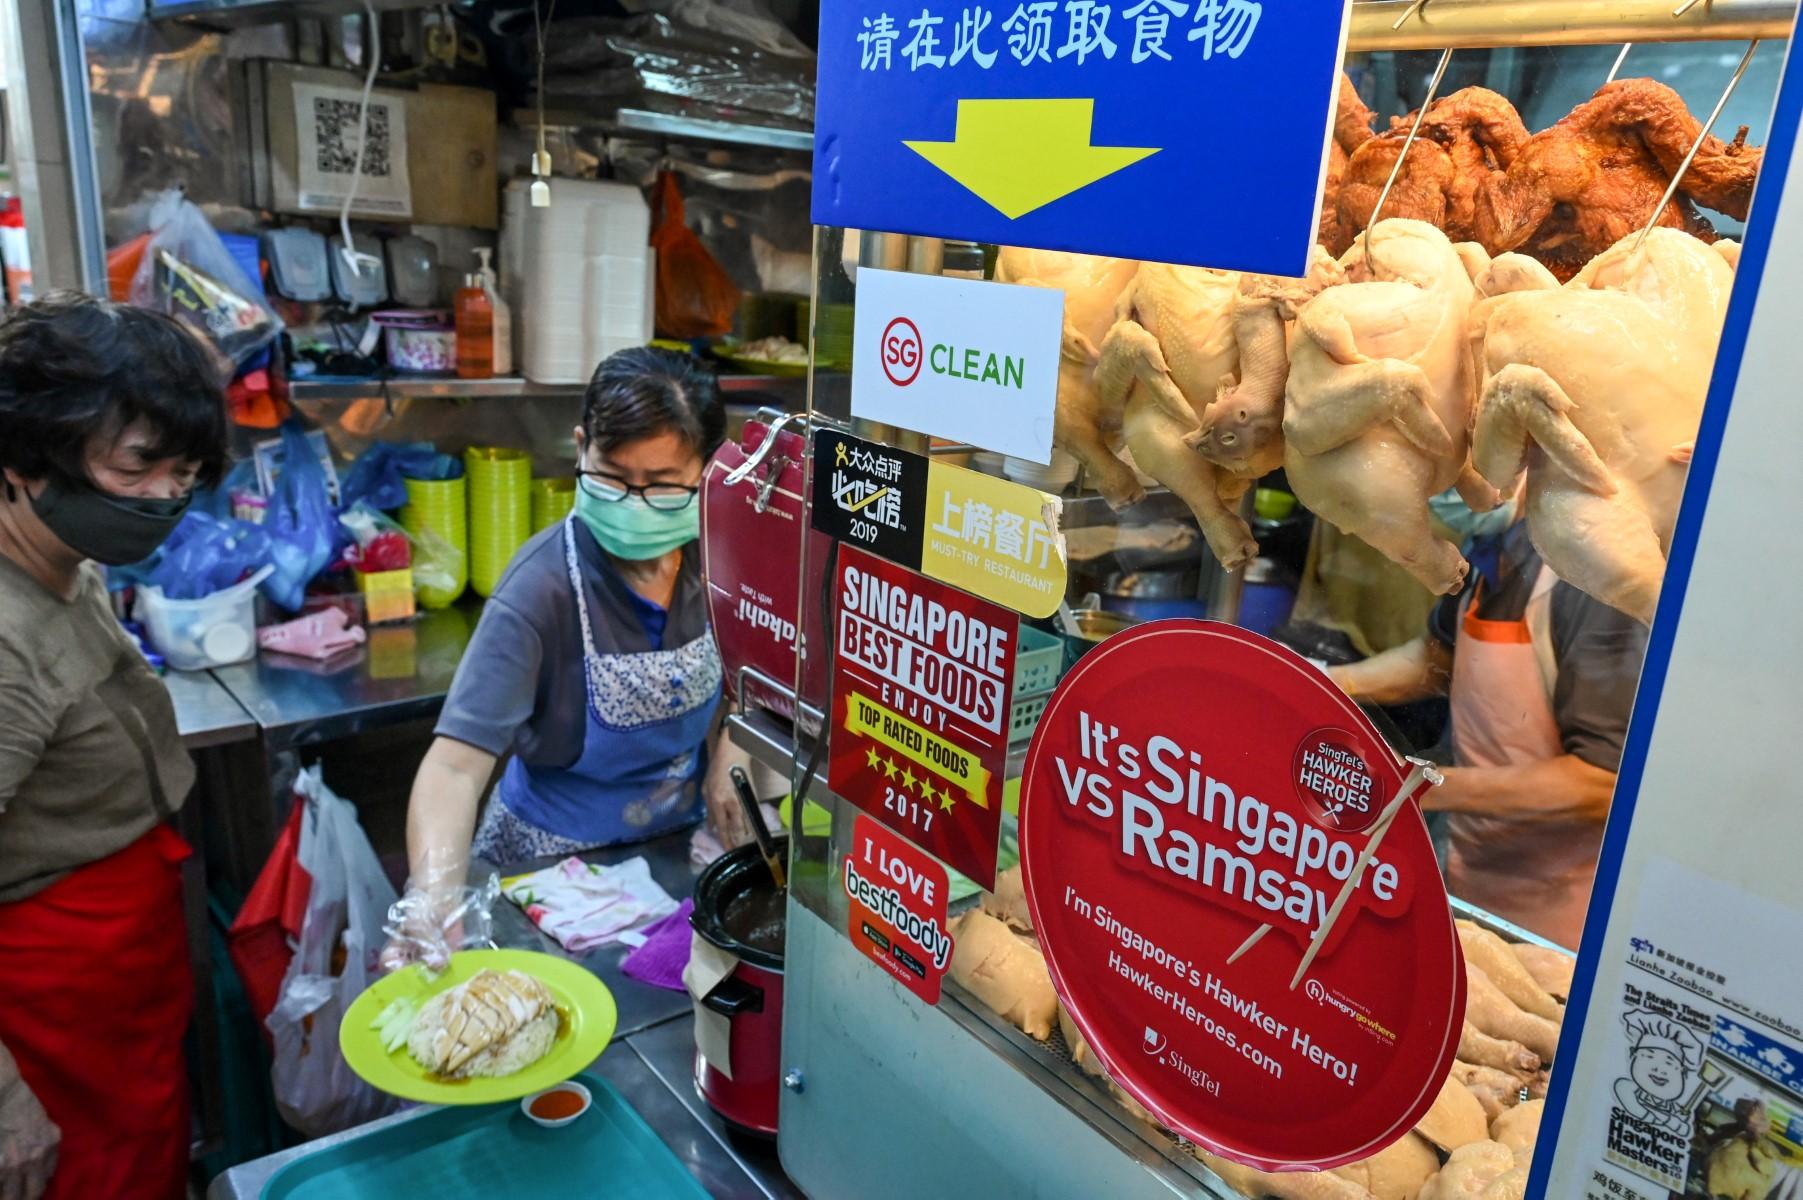 A vendor prepares a plate of chicken rice at a hawker centre in Singapore on May 31. Singapore imports a third of its chicken supply from Malaysia, which will halt the export of 3.6 million chickens a month from June 1 onwards, amid surging prices and supply concerns. Photo: AFP